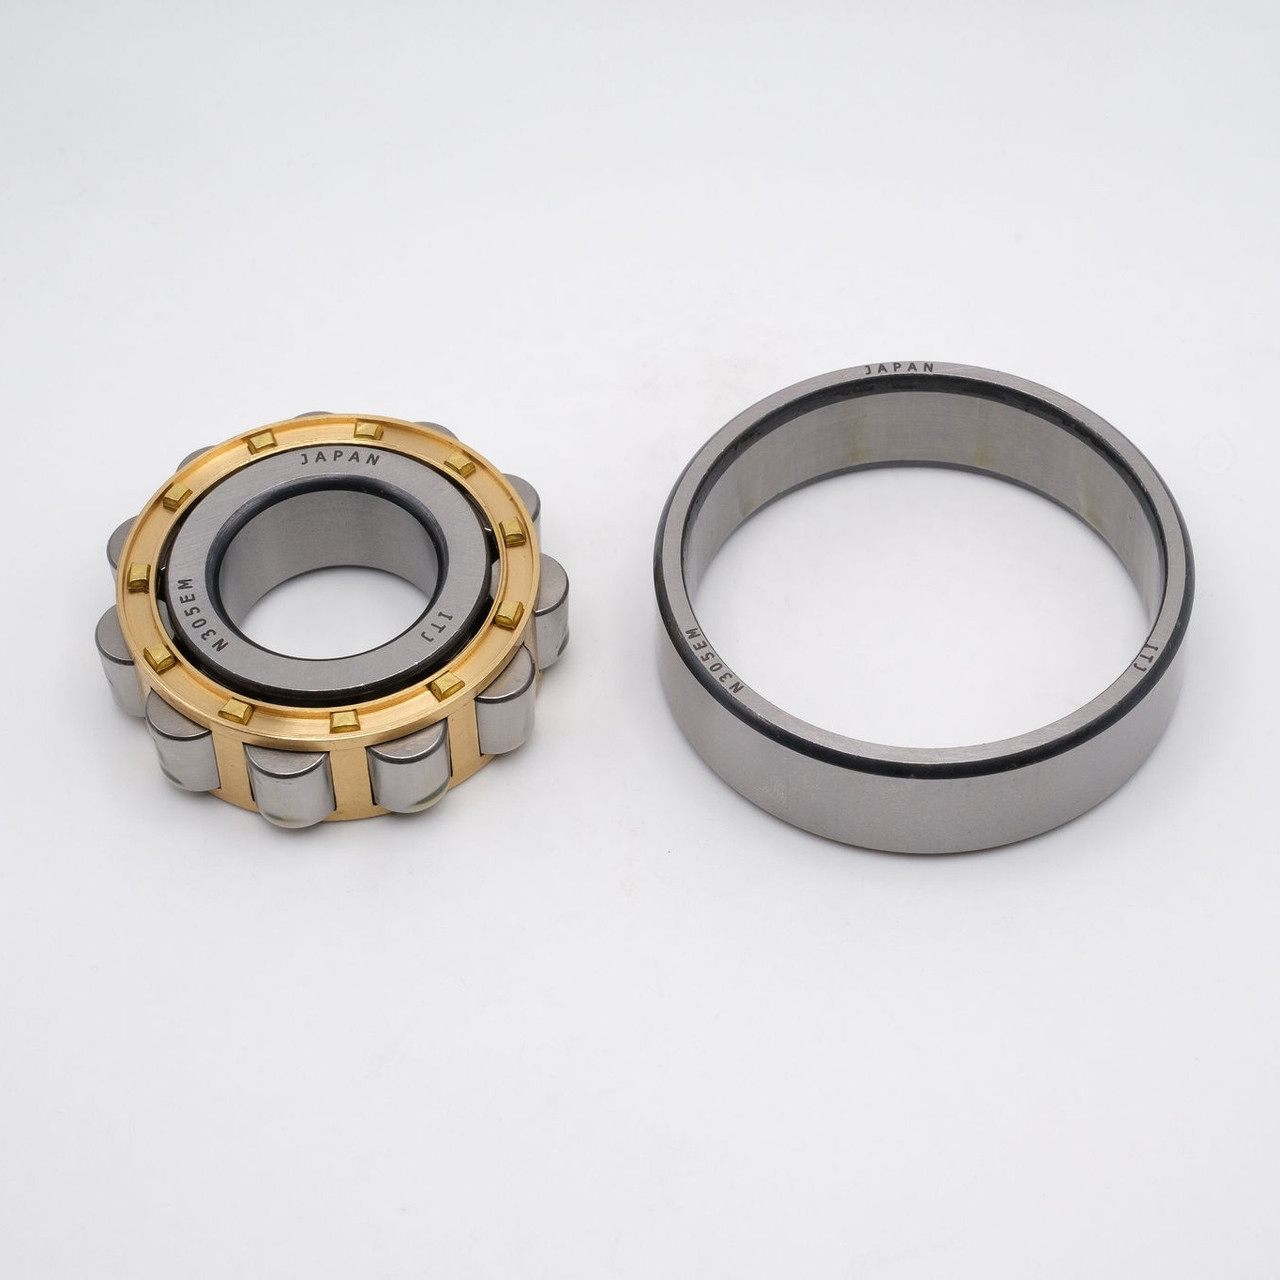 NU310EM Cylindrical Roller Bearing Brass Cage 50x110x27 Separated View